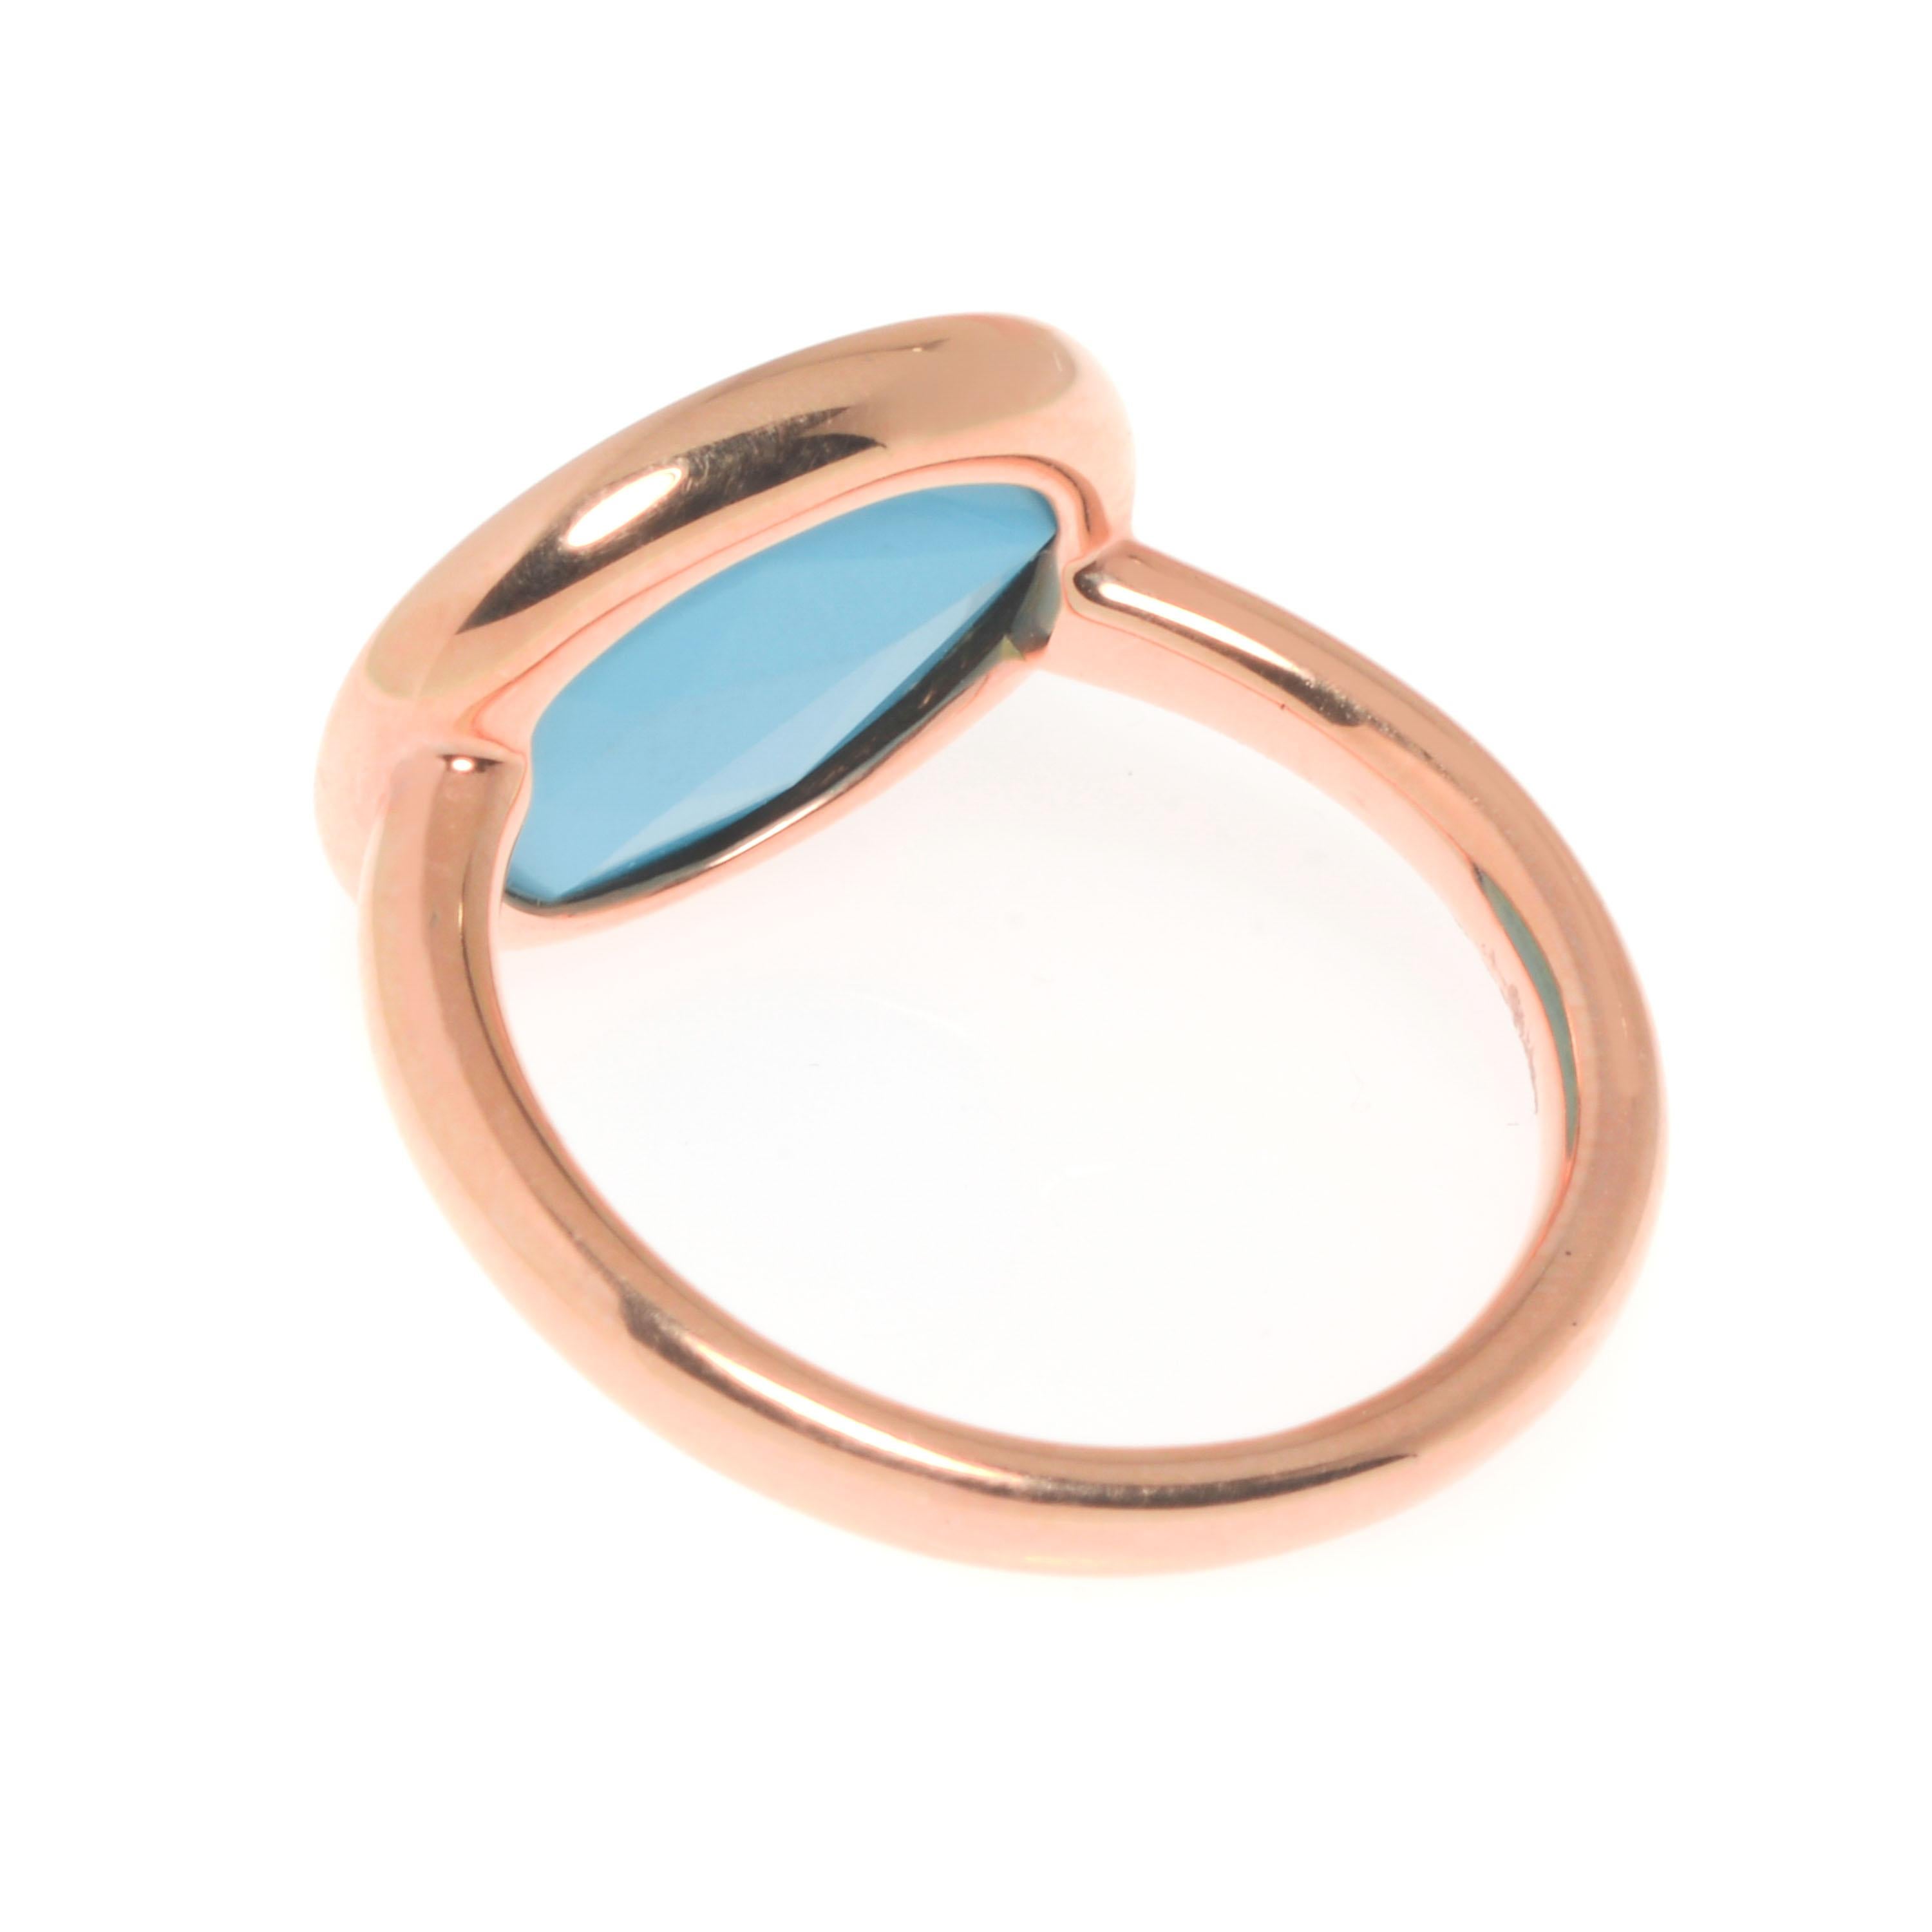 Contemporary Mimi Milano 18K Rose Gold, Turquoise Cocktail Ring sz 6.5 For Sale